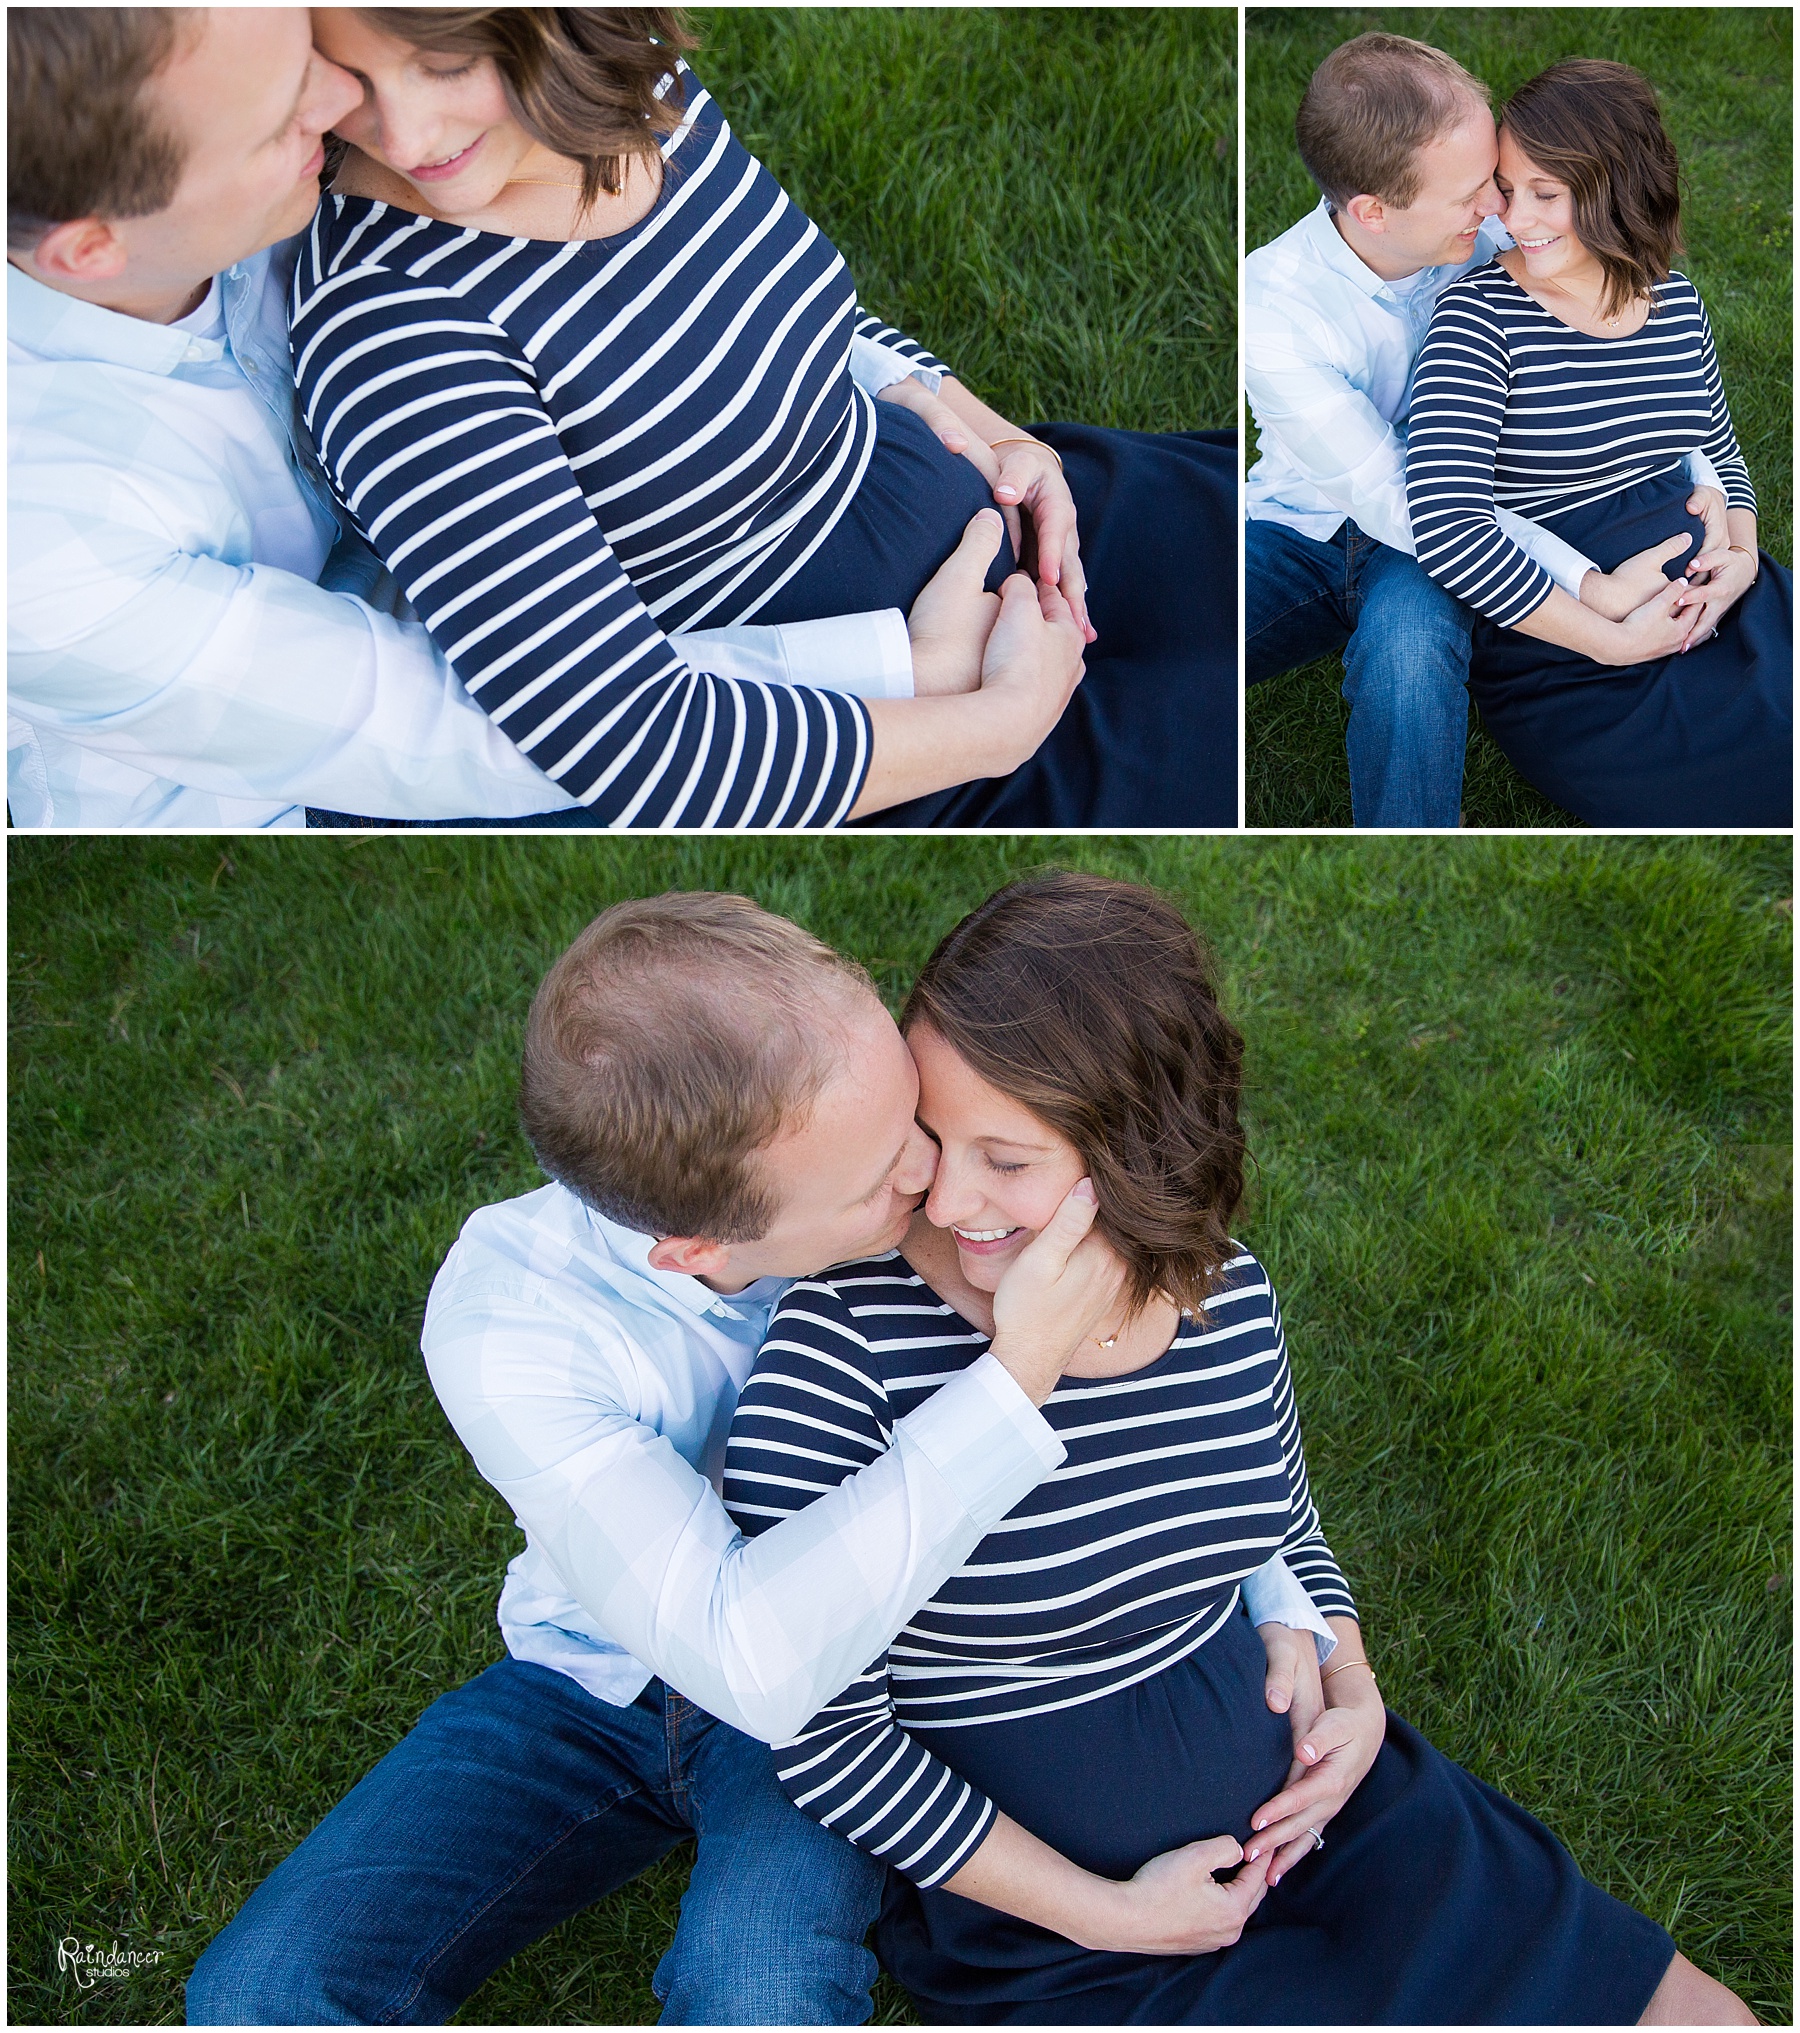 Indianapolis Maternity photographer, Indy maternity photographer, Indianapolis family photographer, Indy family photographer, Indy maternity photography, Indianapolis maternity photography, Indy baby photographer, Indianapolis Newborn Photographer, Indianapolis baby photographer